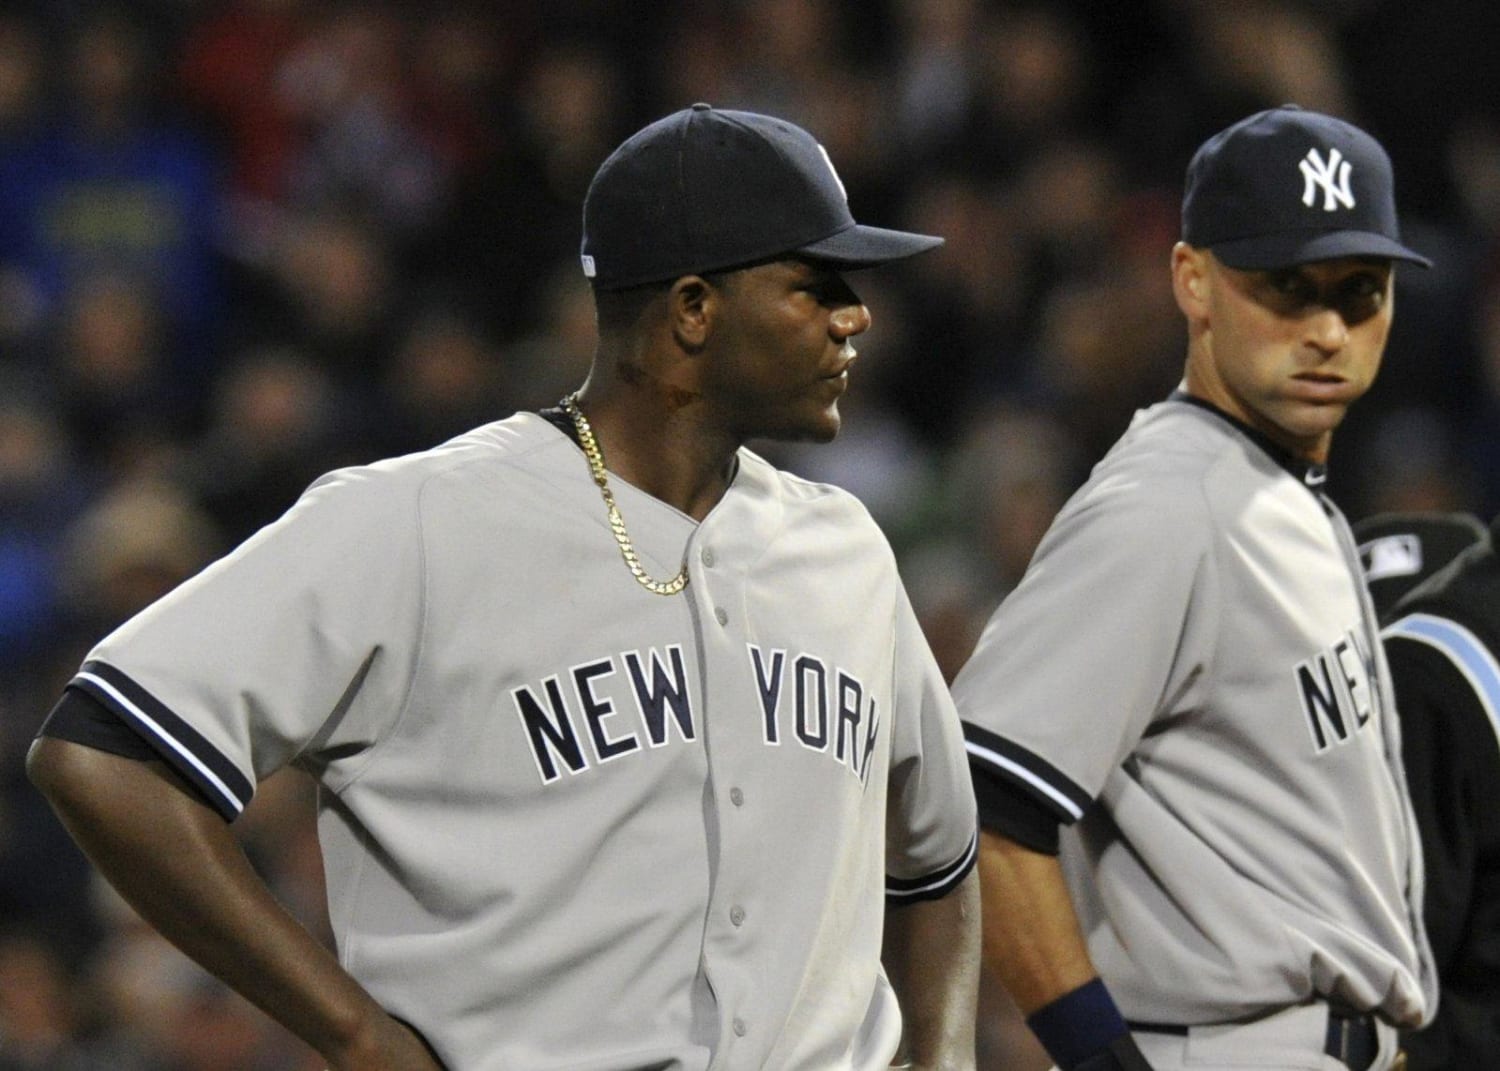 Michael Pineda's 16-strikeout day fueled my Yankees fandom